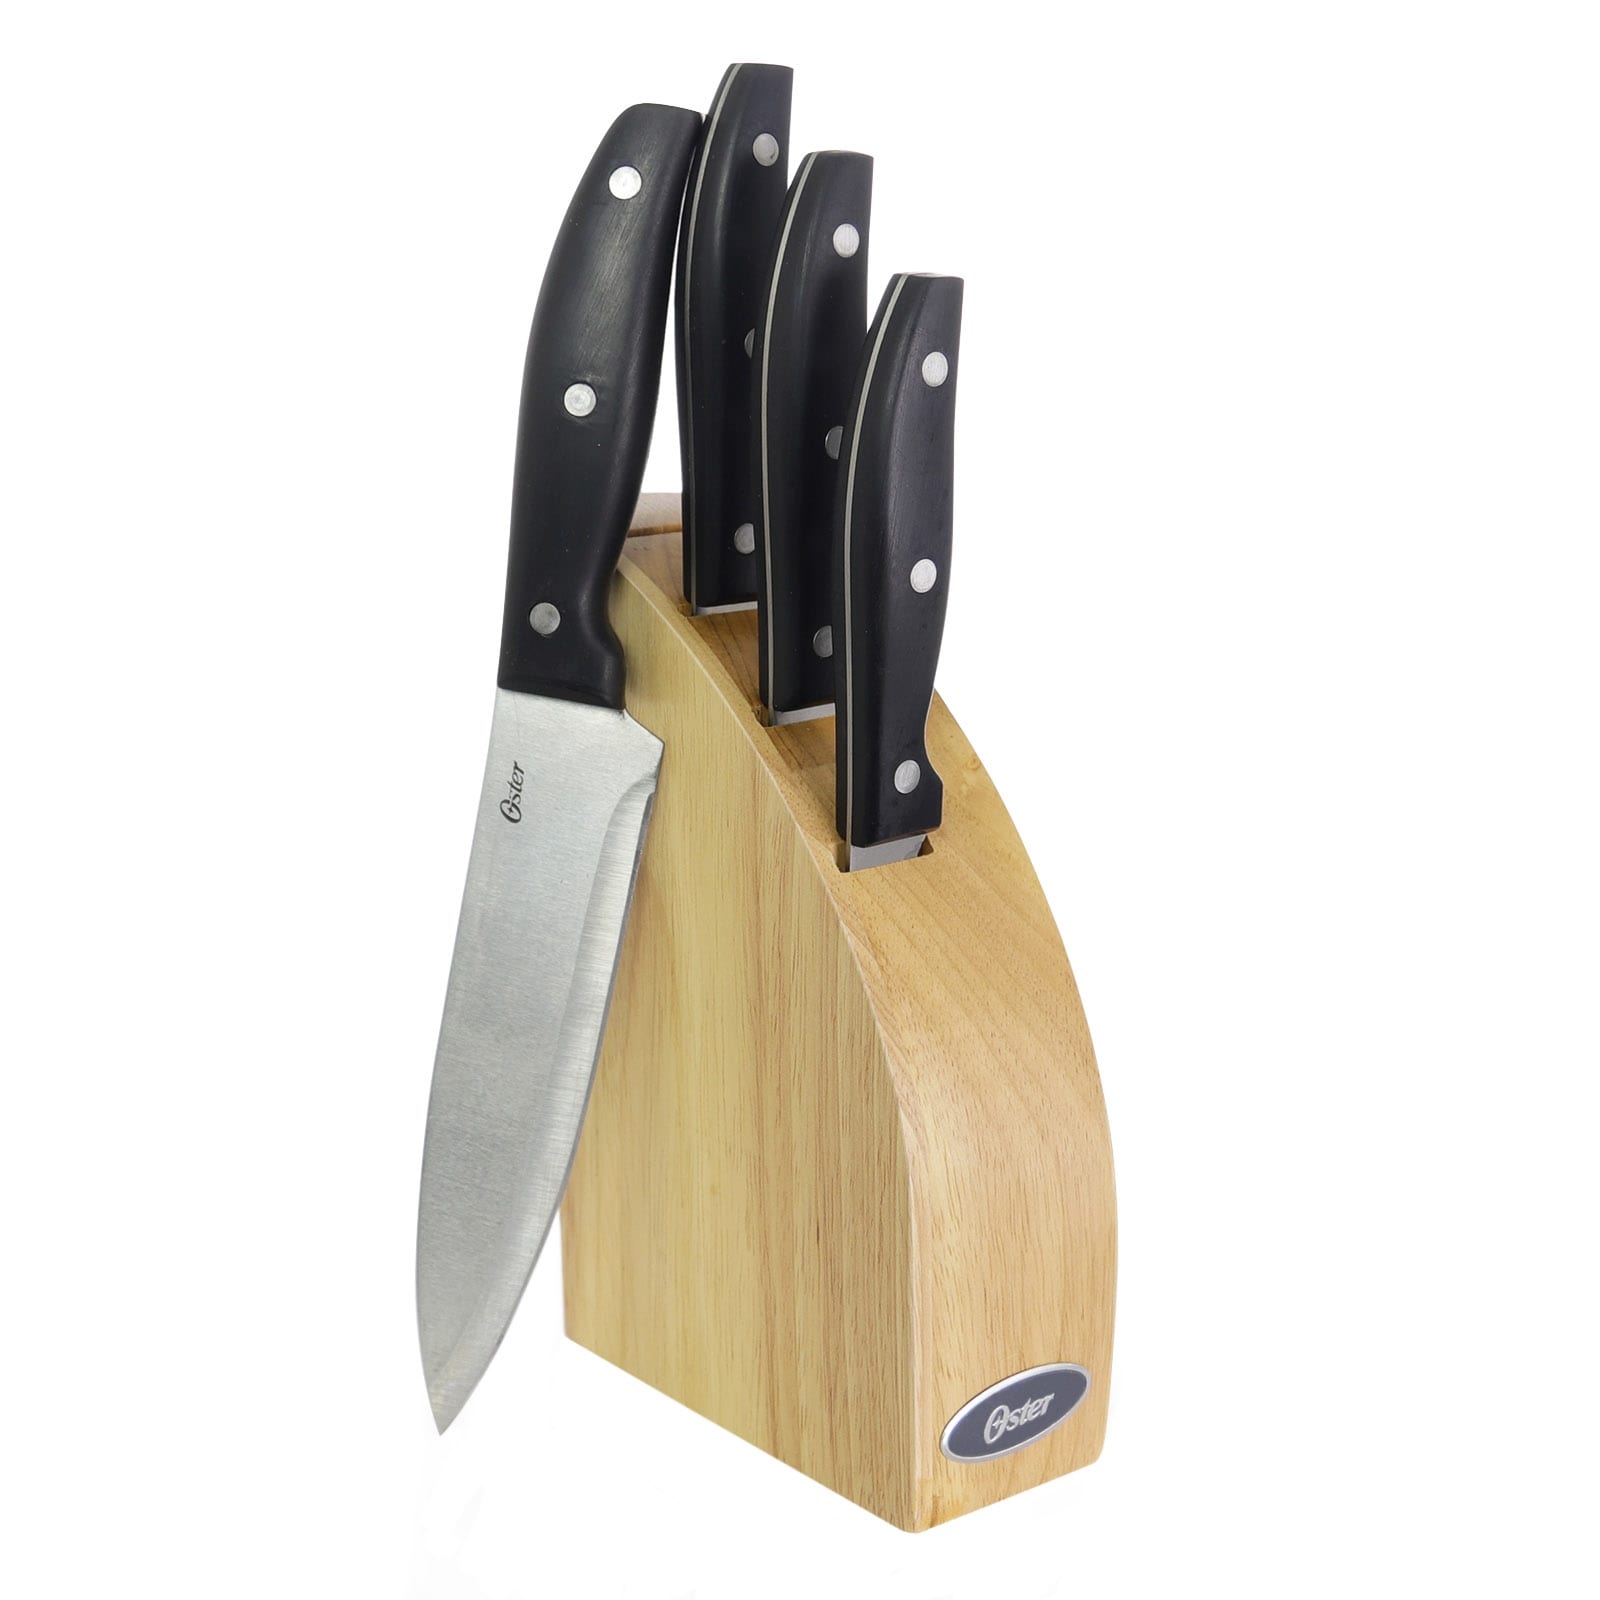 https://ak1.ostkcdn.com/images/products/is/images/direct/a217f371400fbec6764407ea738642a1fe4dc021/Oster-Granger-5-Piece-Stainless-Steel-Cutlery-Knife-Set-with-Half-Moon-Natural-Wood-Block.jpg